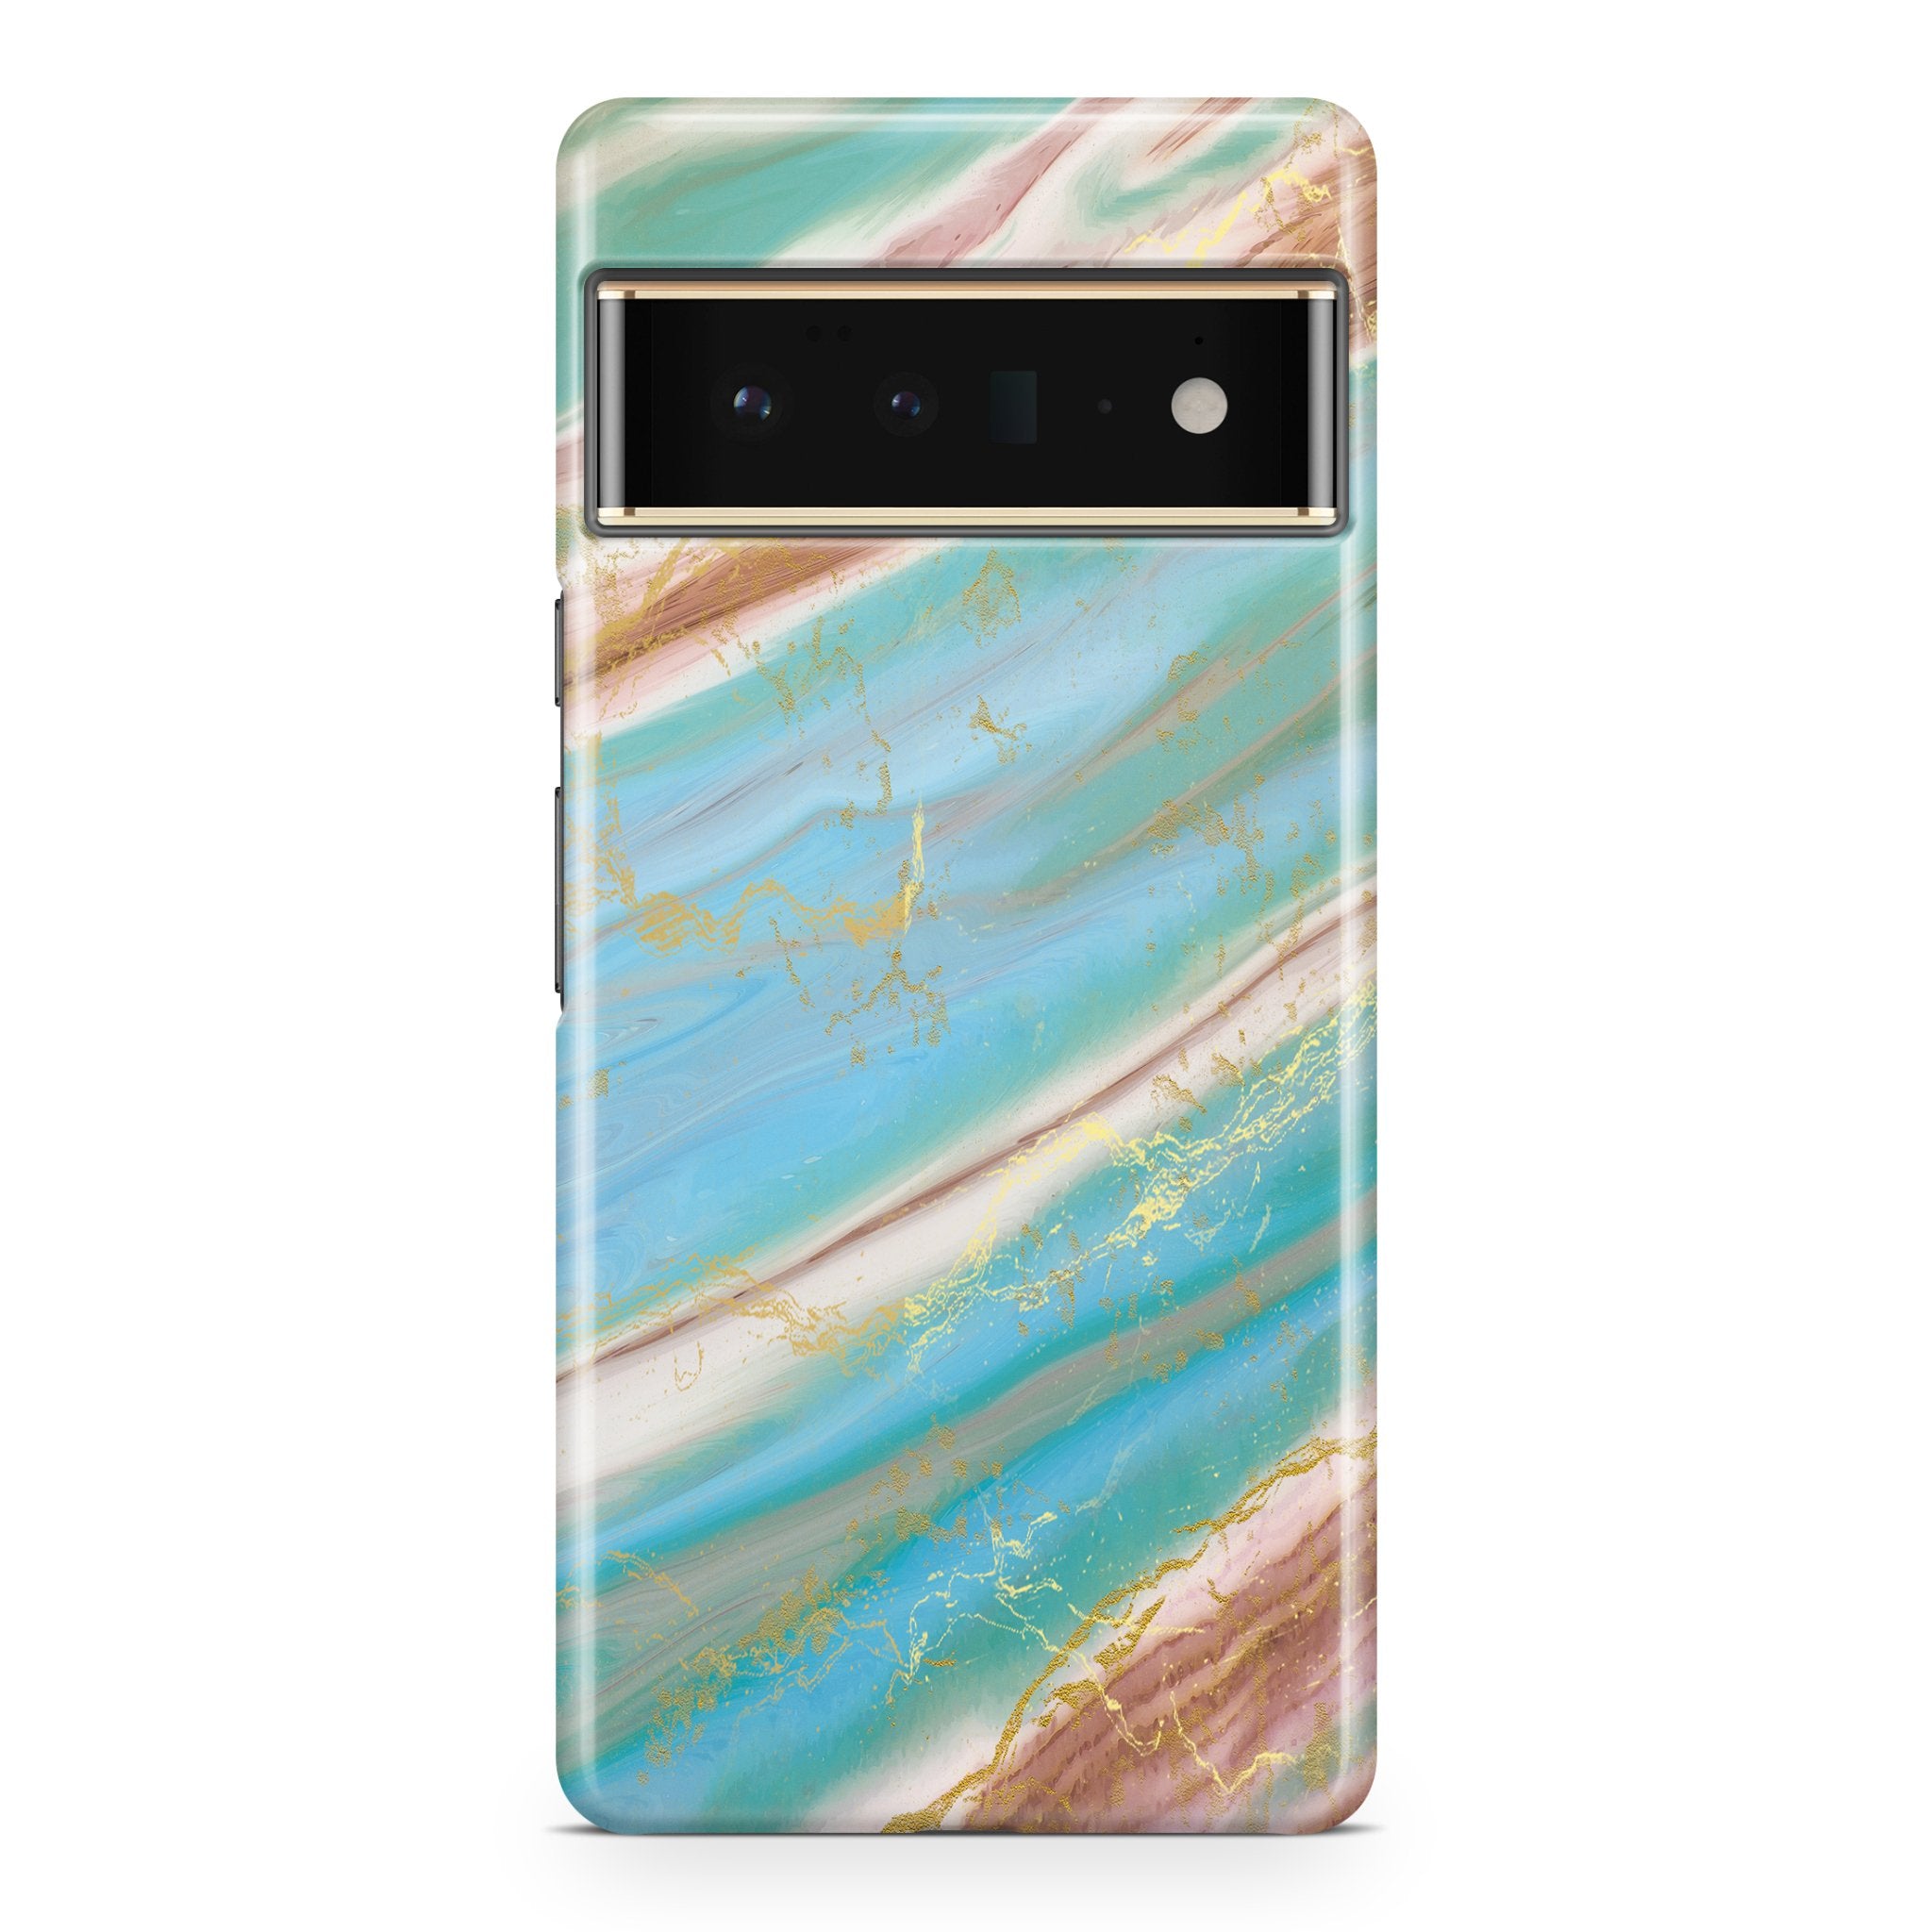 Southern Agate - Google phone case designs by CaseSwagger